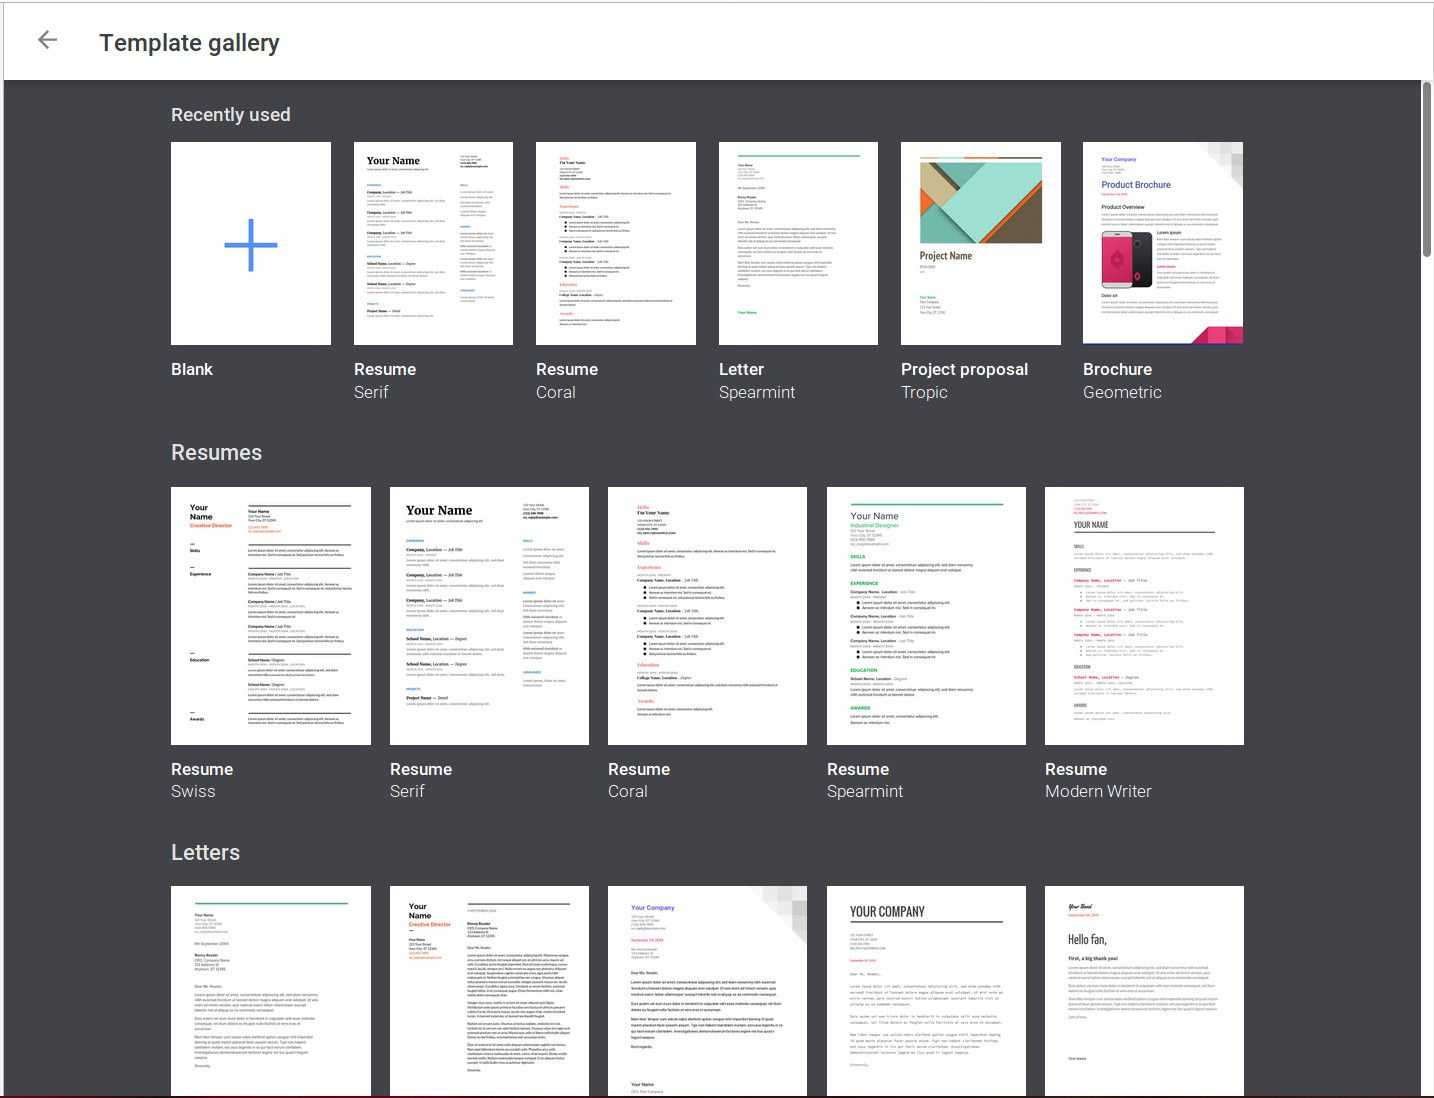 How To Create A Free Google Docs Template Pertaining To Google Docs Templates Brochure